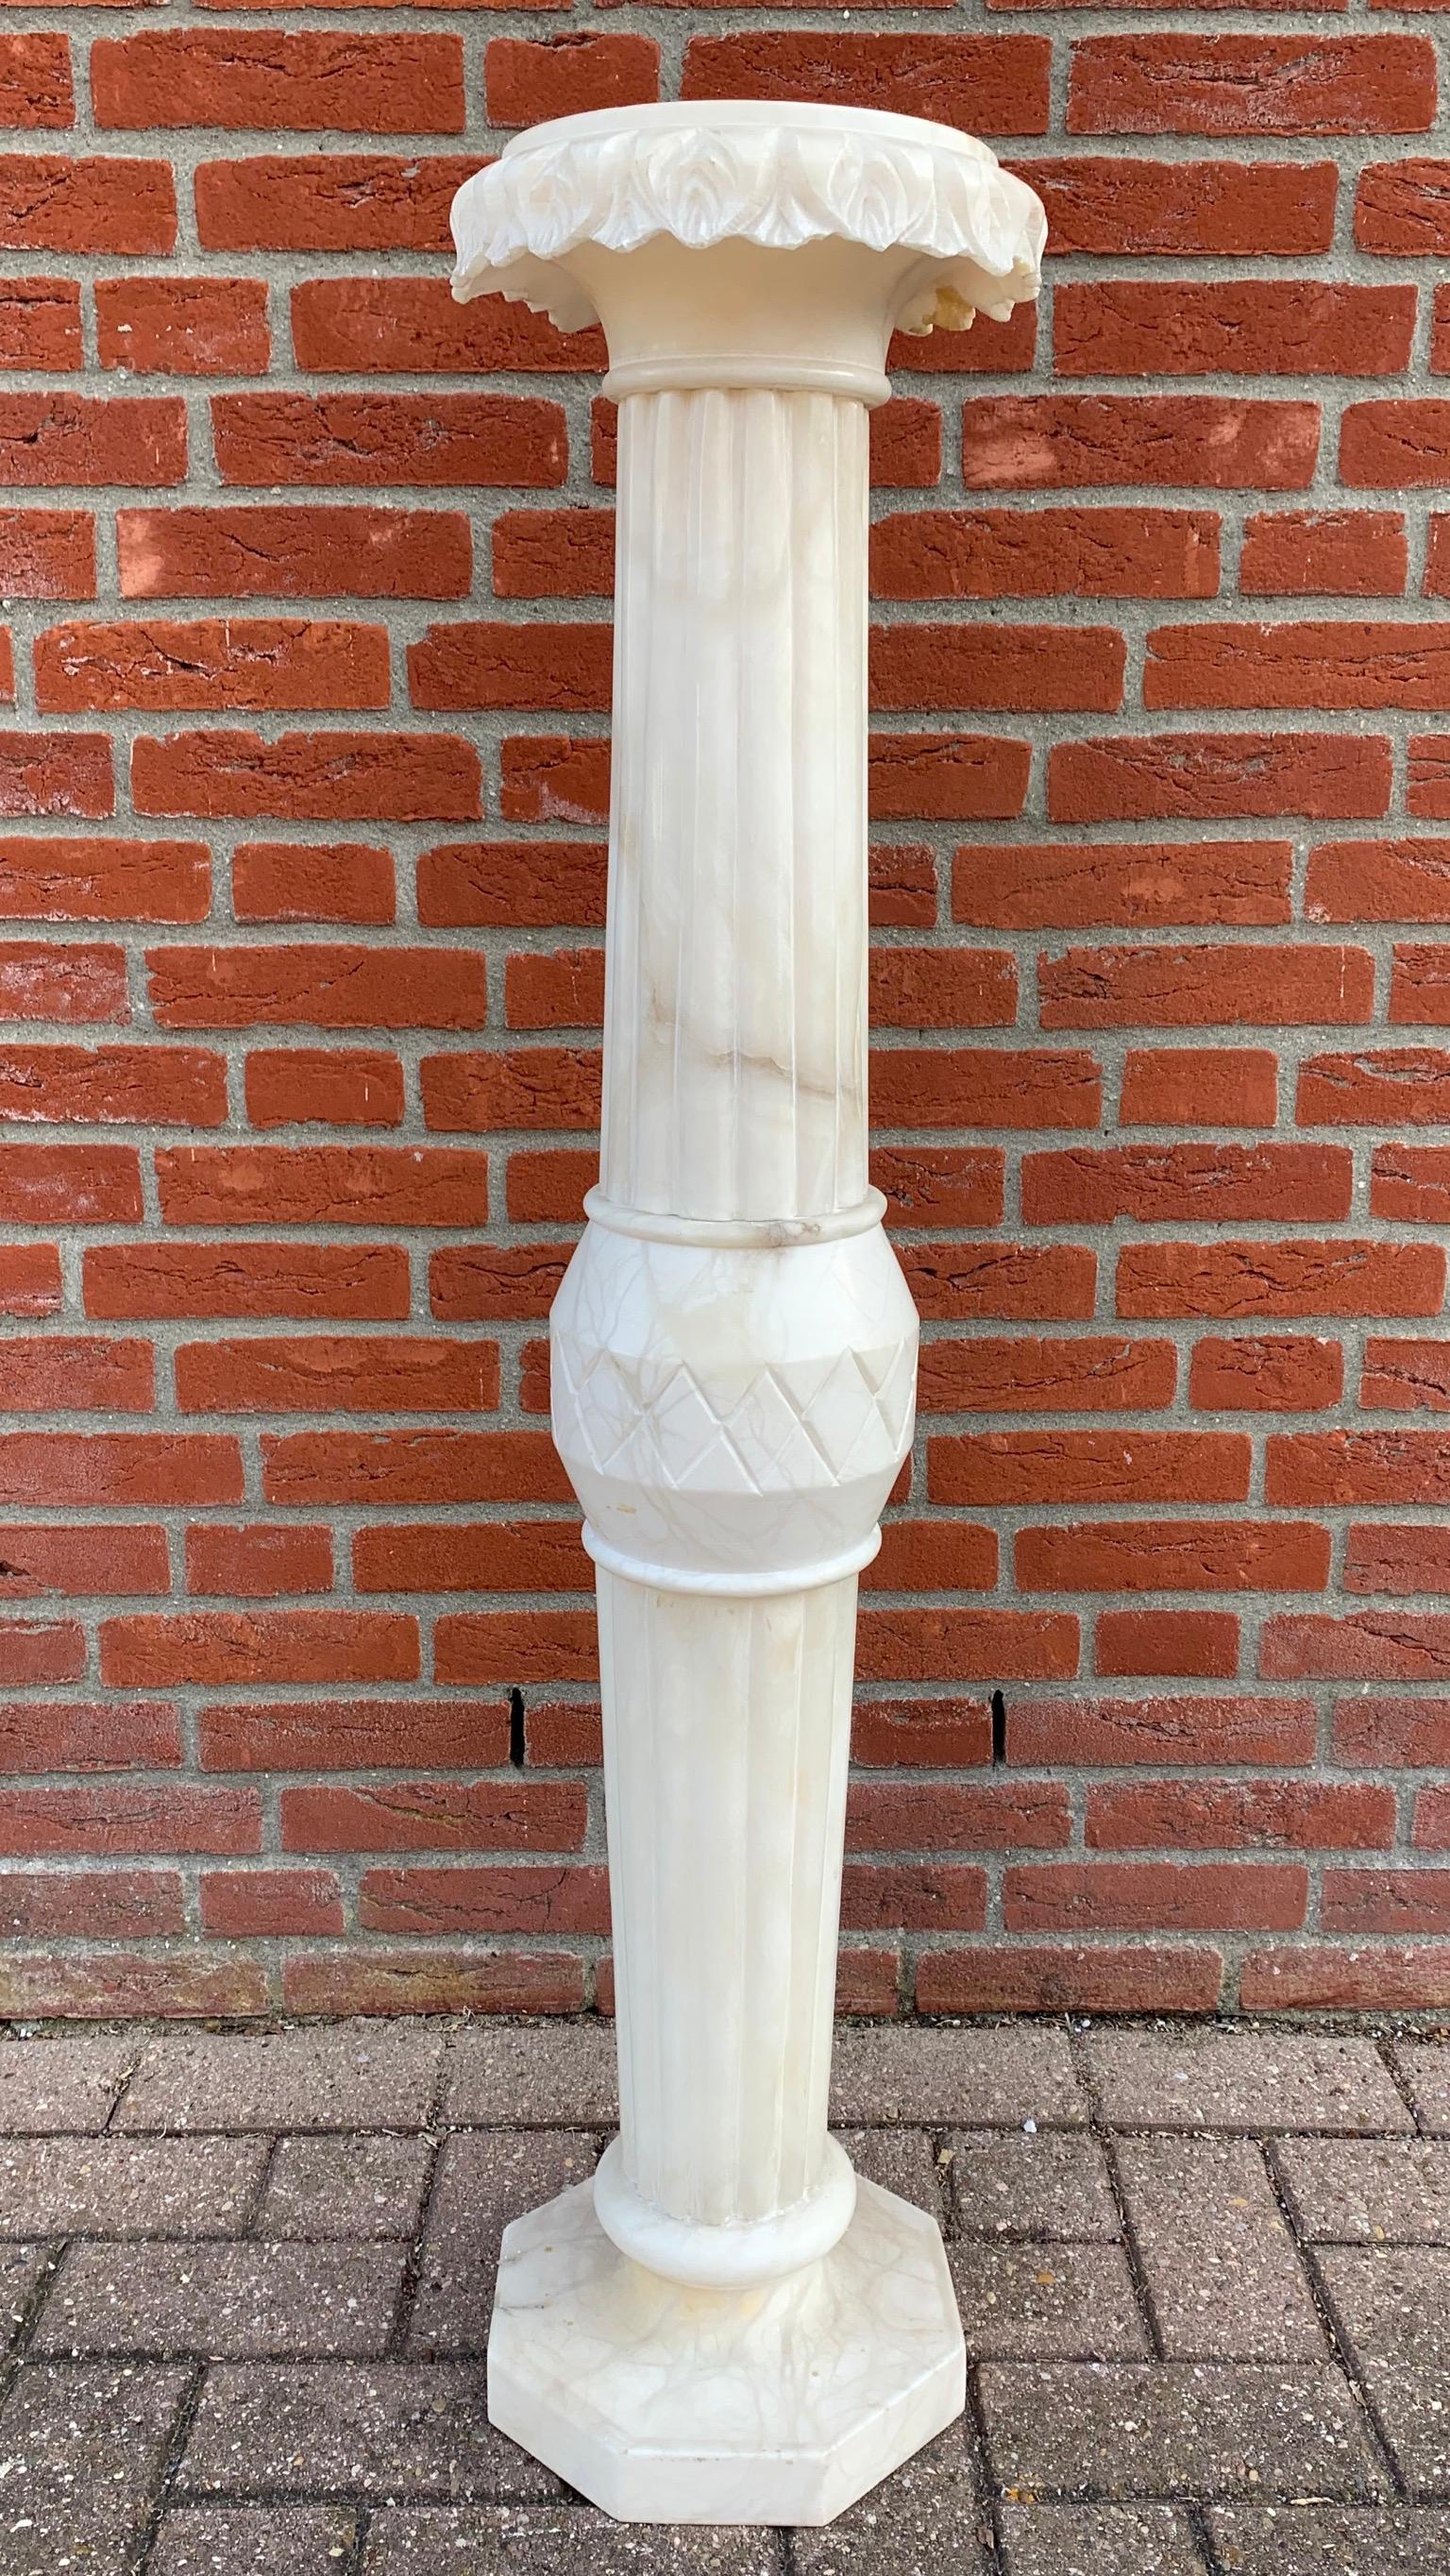 Wonderfully stylish and perfectly hand carved alabaster column for displaying a work of art.

This beautiful and classical pedestal on its octagonal base is perfect for showcasing a vase, a sculpture or a bust. Its overall shape, its cleanliness